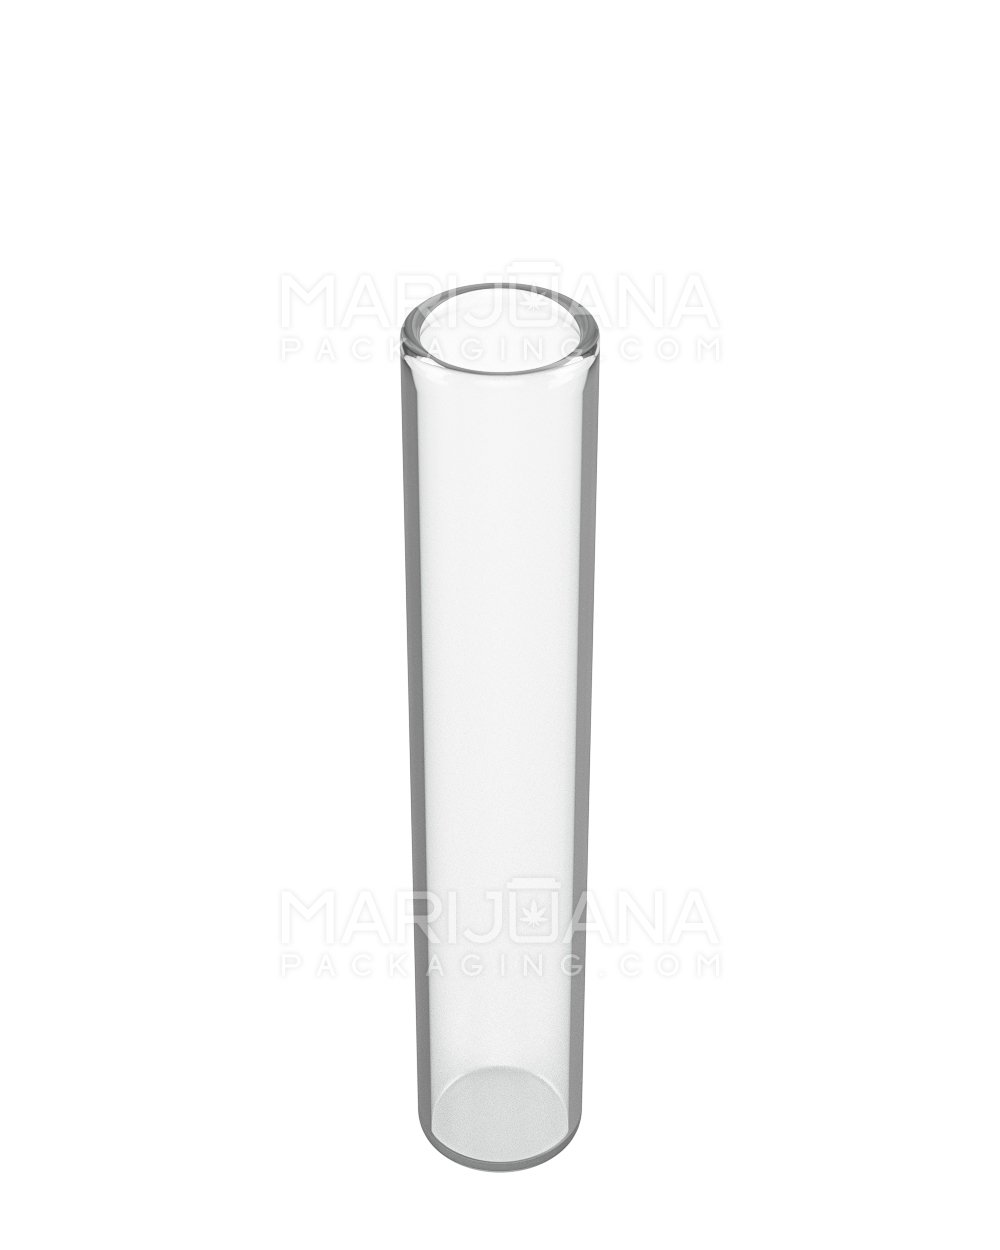 Glass Pre-Roll Tube with Cork Top | 120mm - Clear Glass - 640 Count - 6